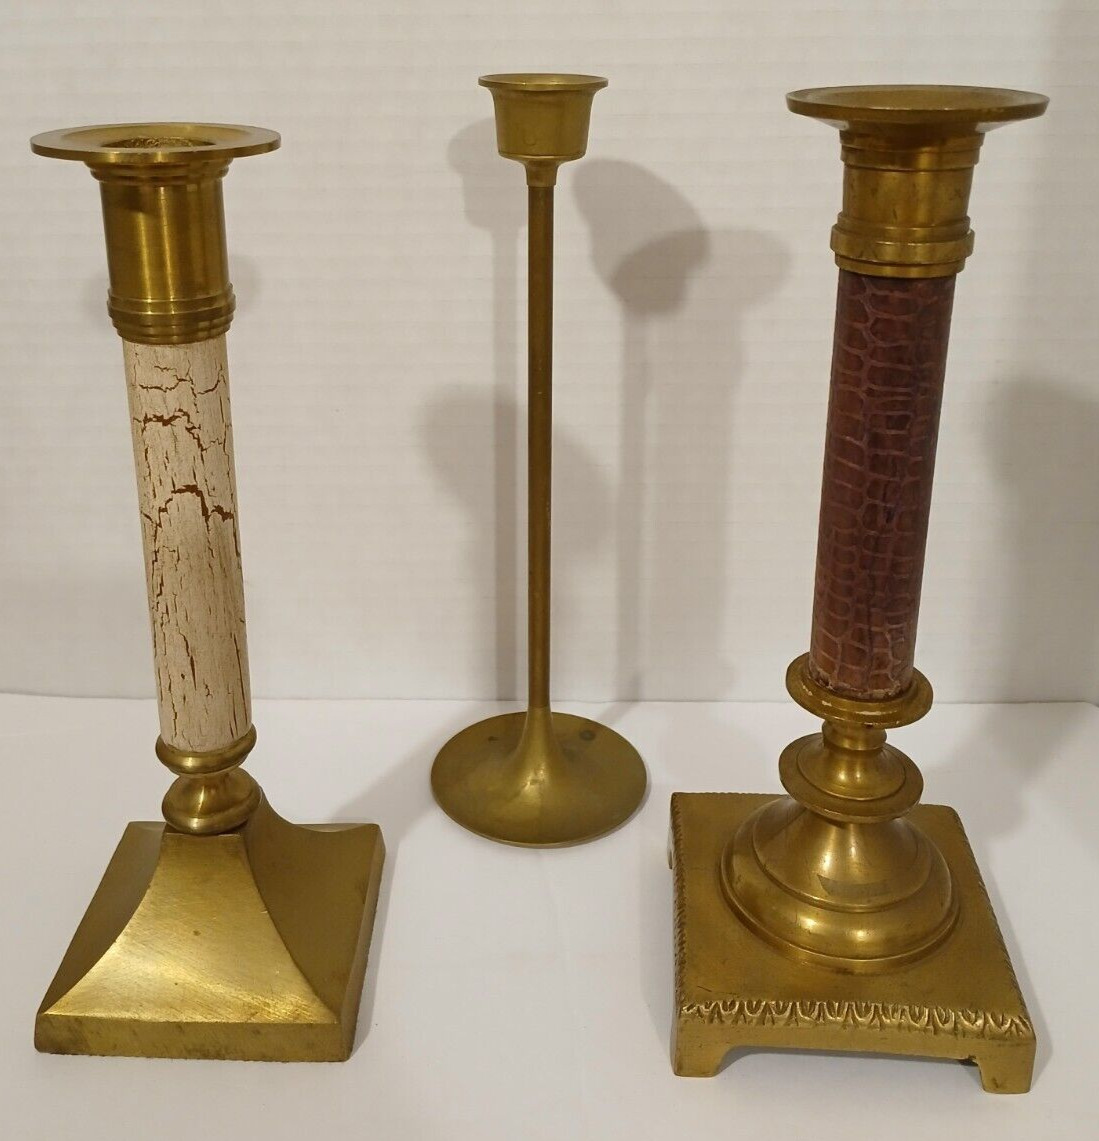 3 Antique Brass 8 Inch Candlestick Vintage Candle Holders